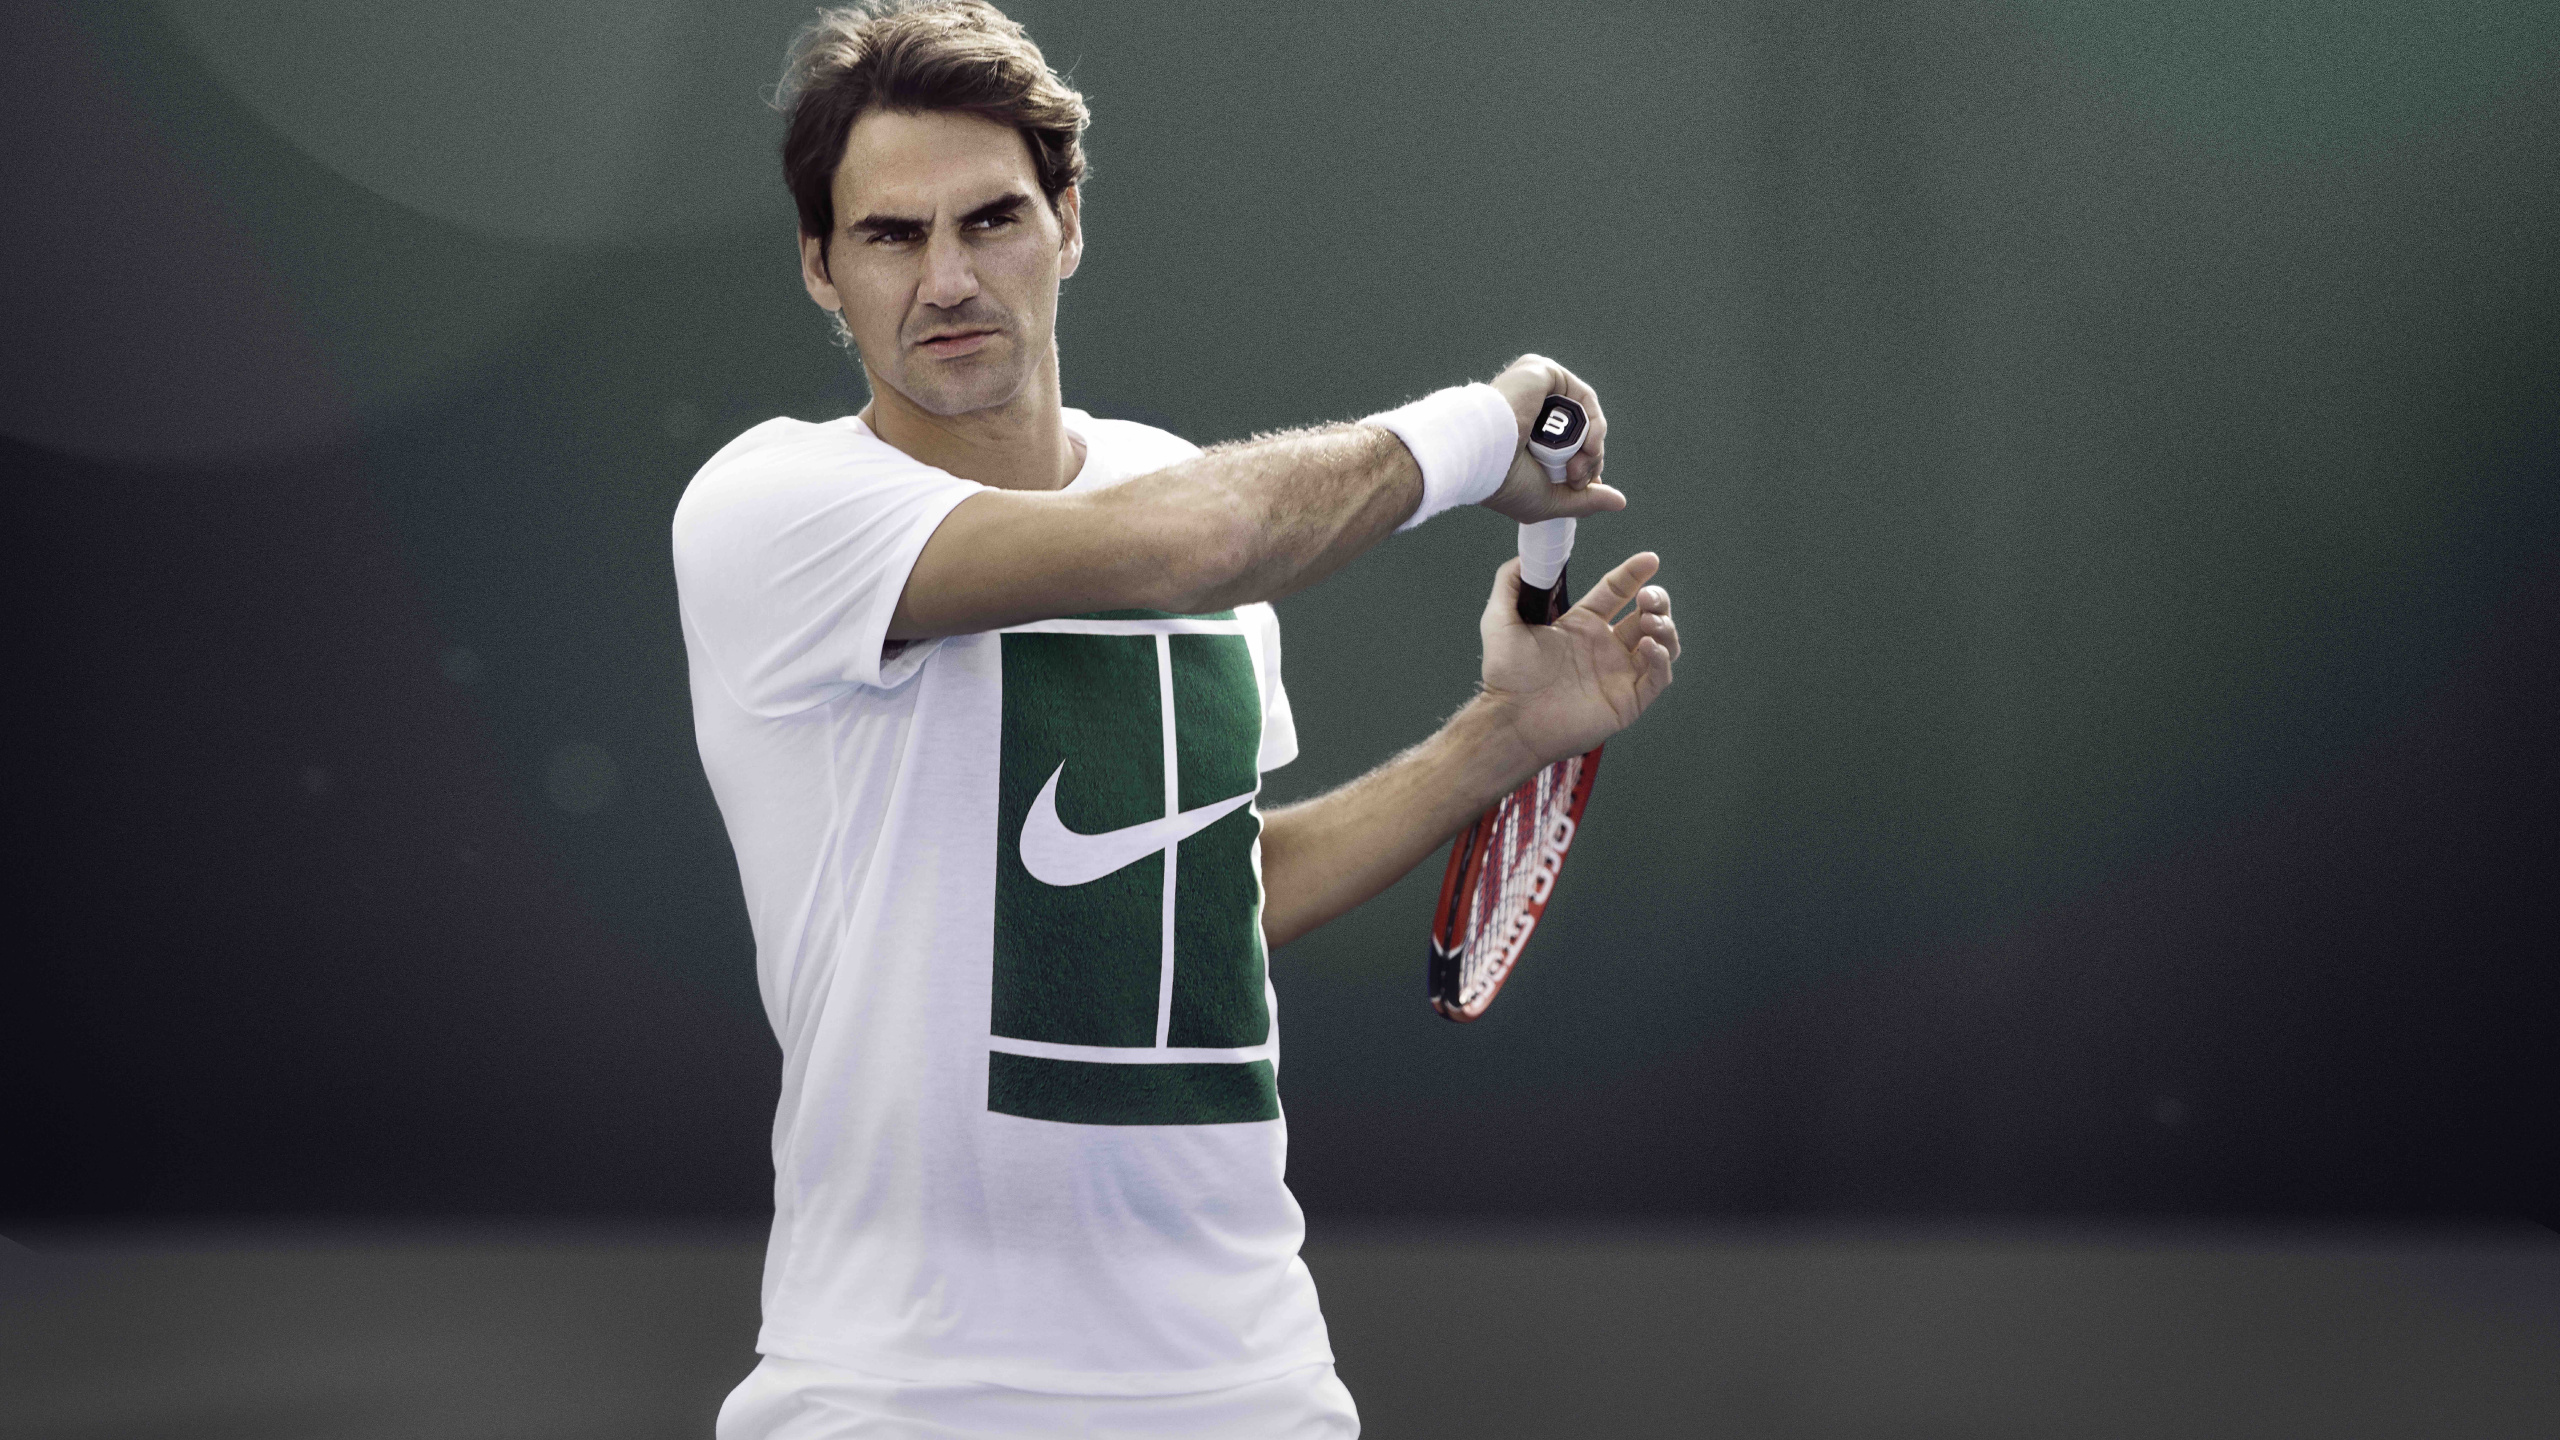 Man in Green and White Nike Jersey Shirt Holding Red and White Tennis Racket. Wallpaper in 2560x1440 Resolution